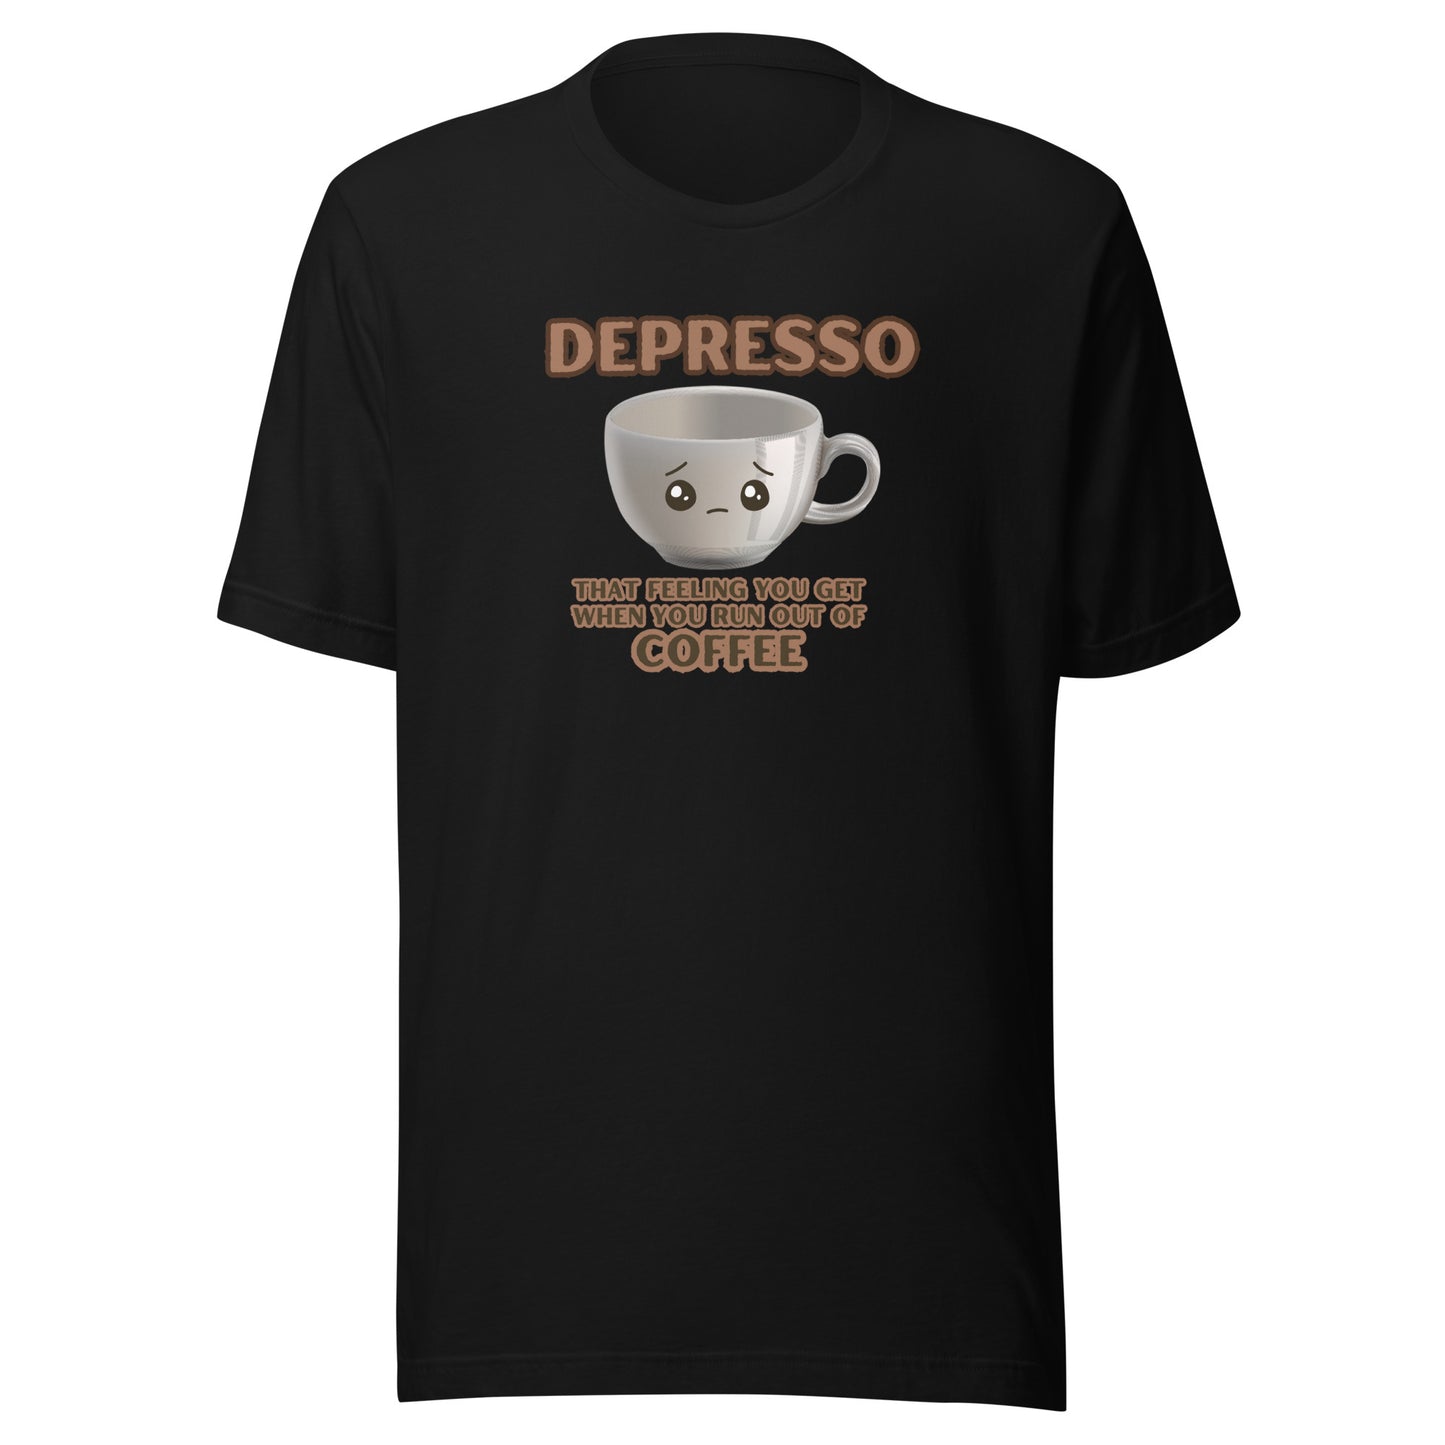 Depresso That Feeling You Get When You Run Out Of Coffee